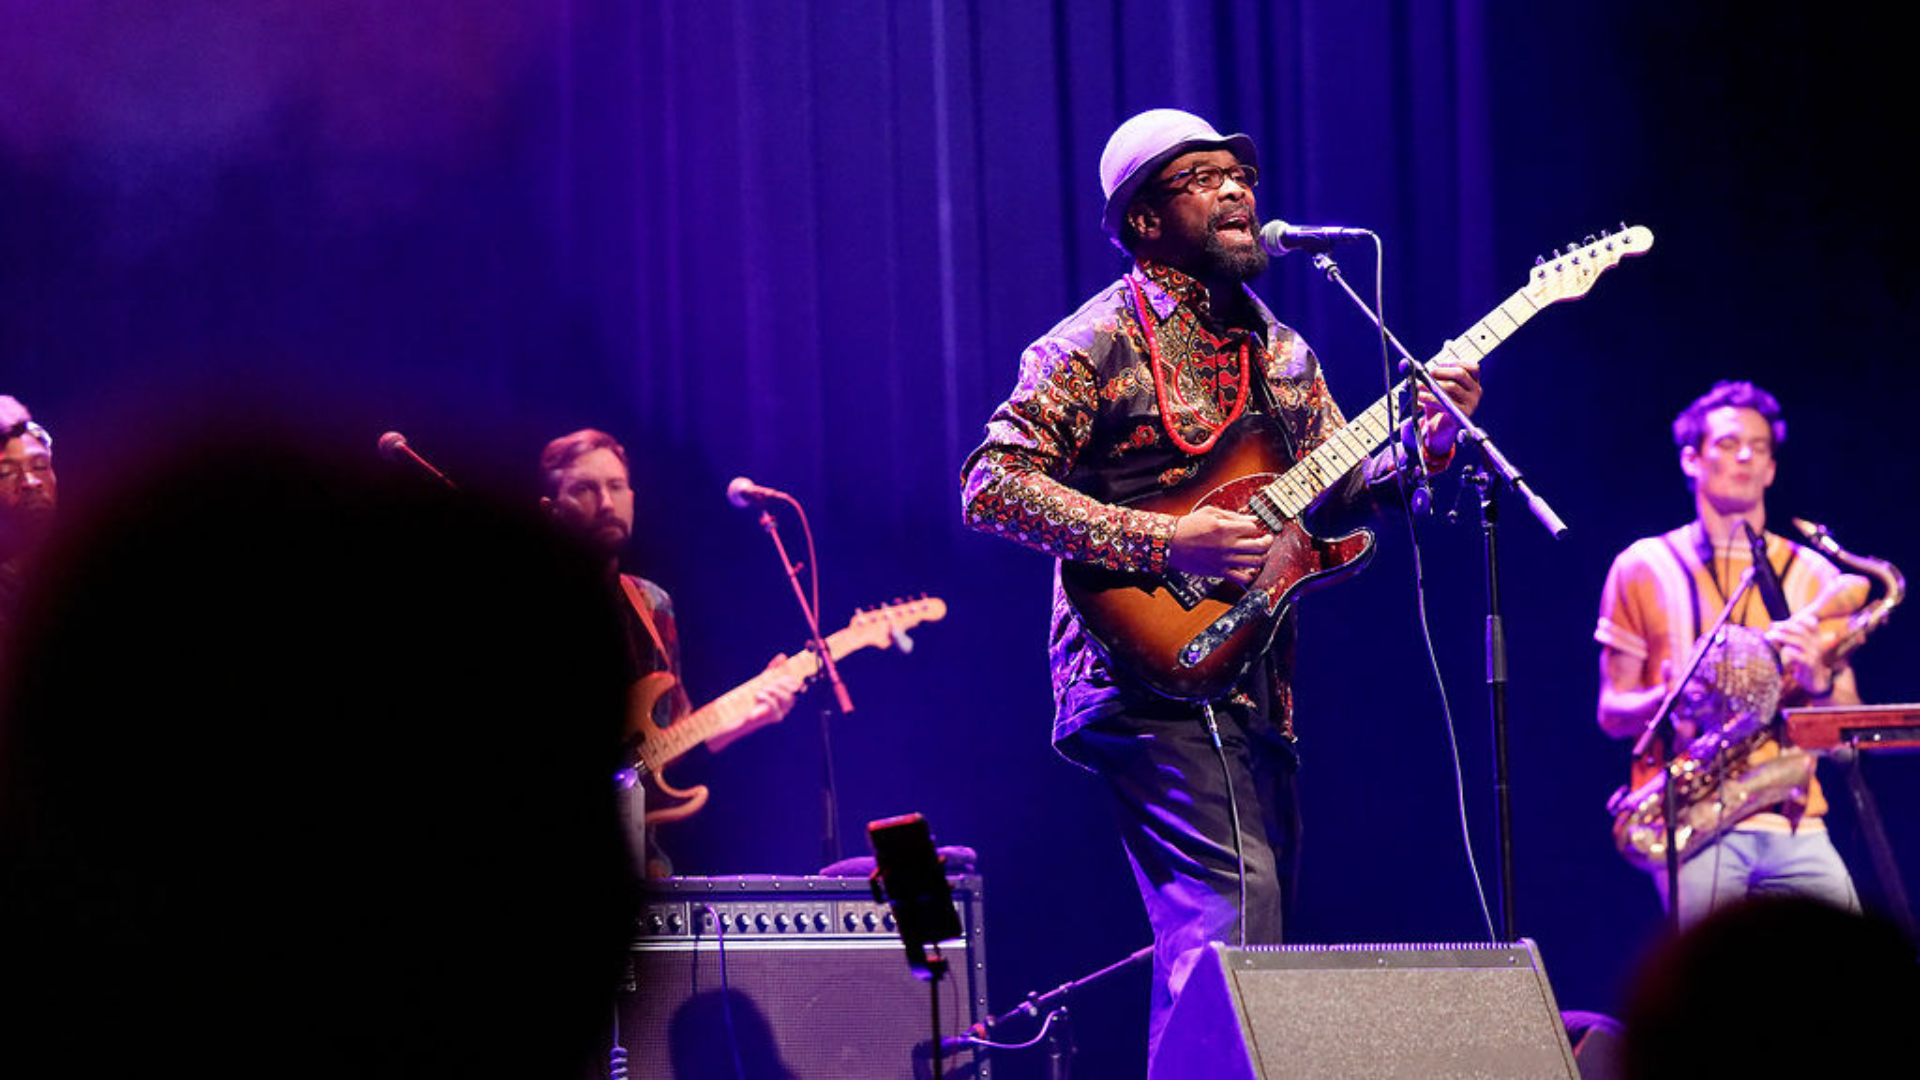 A man plays a brown electric guitar while singing on stage, he is wearing a bowler hat, glasses, and paisley pattern shirt with a large red bead necklace ,his band members are in the background playing a bass guitar and a saxophone